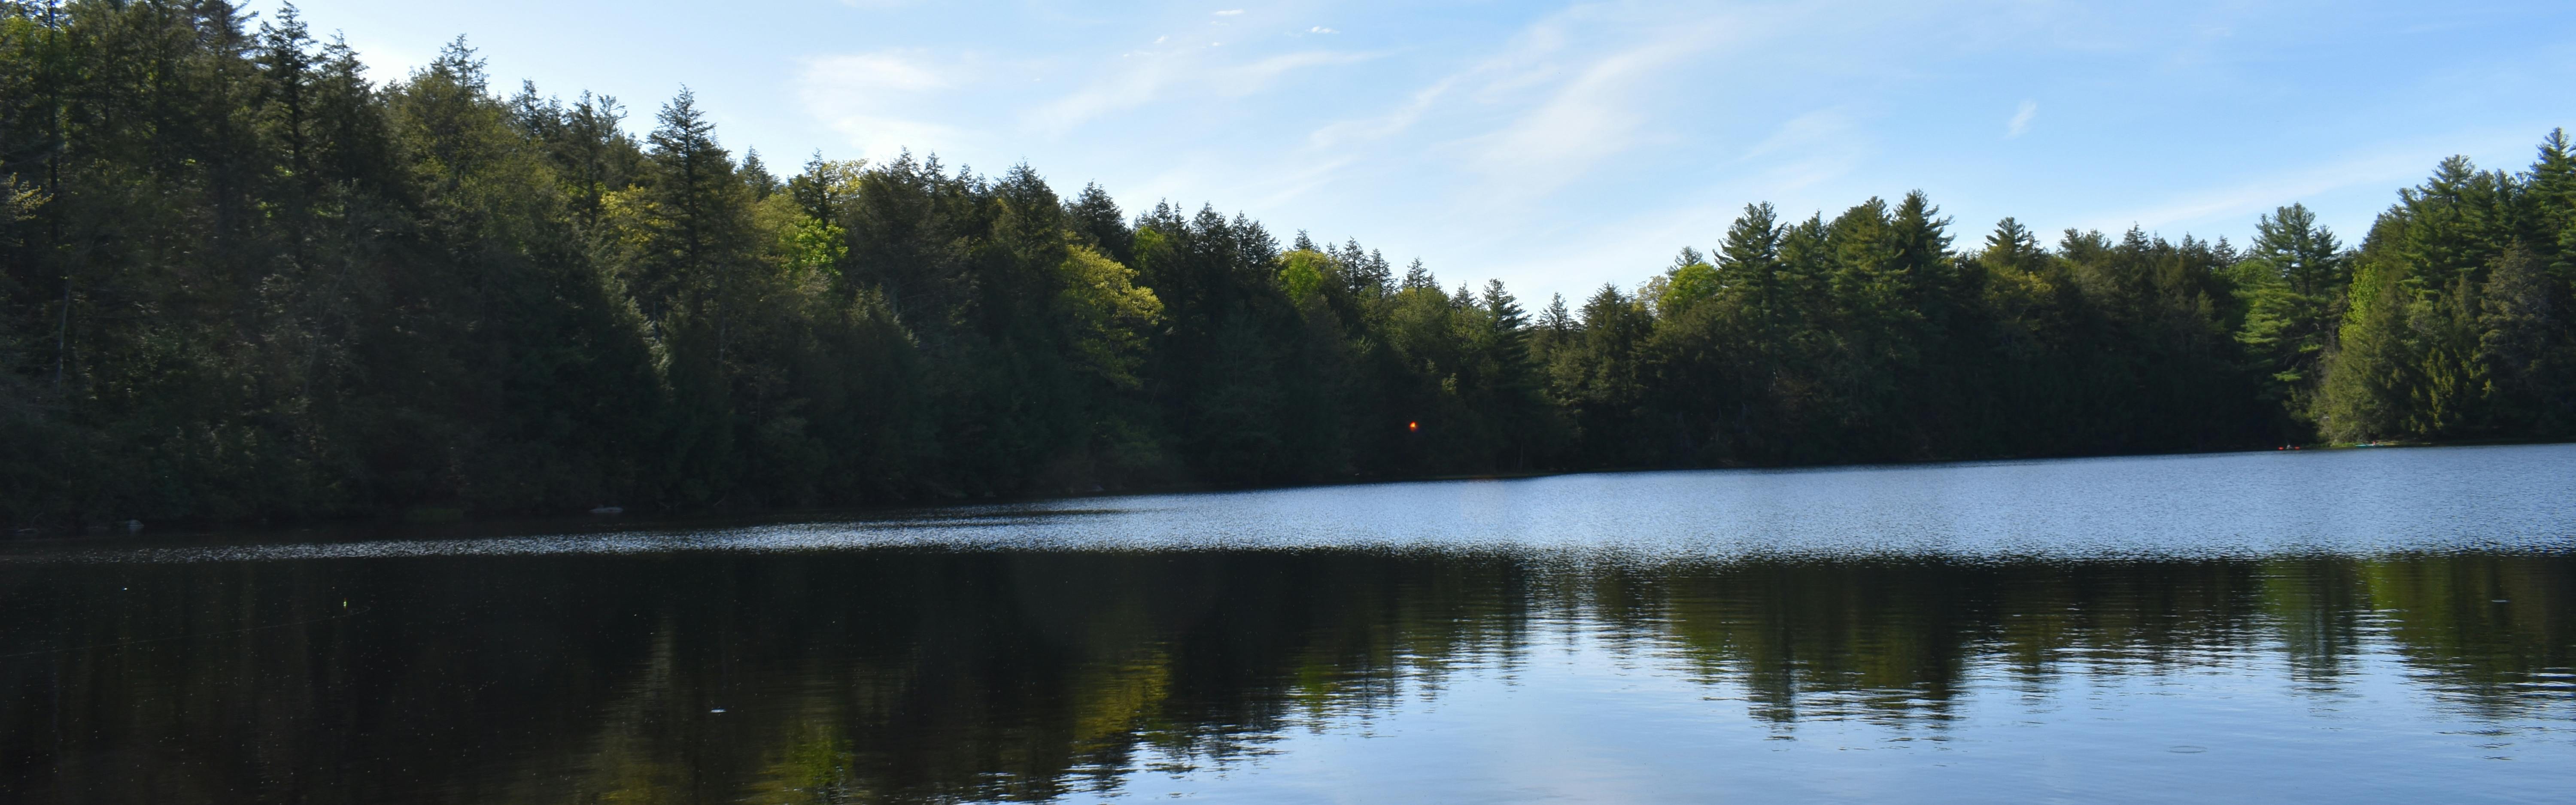 A lake reflects its pine-tree-lined edges and baby blue sky.  There are a few wispy clouds in the sky. 